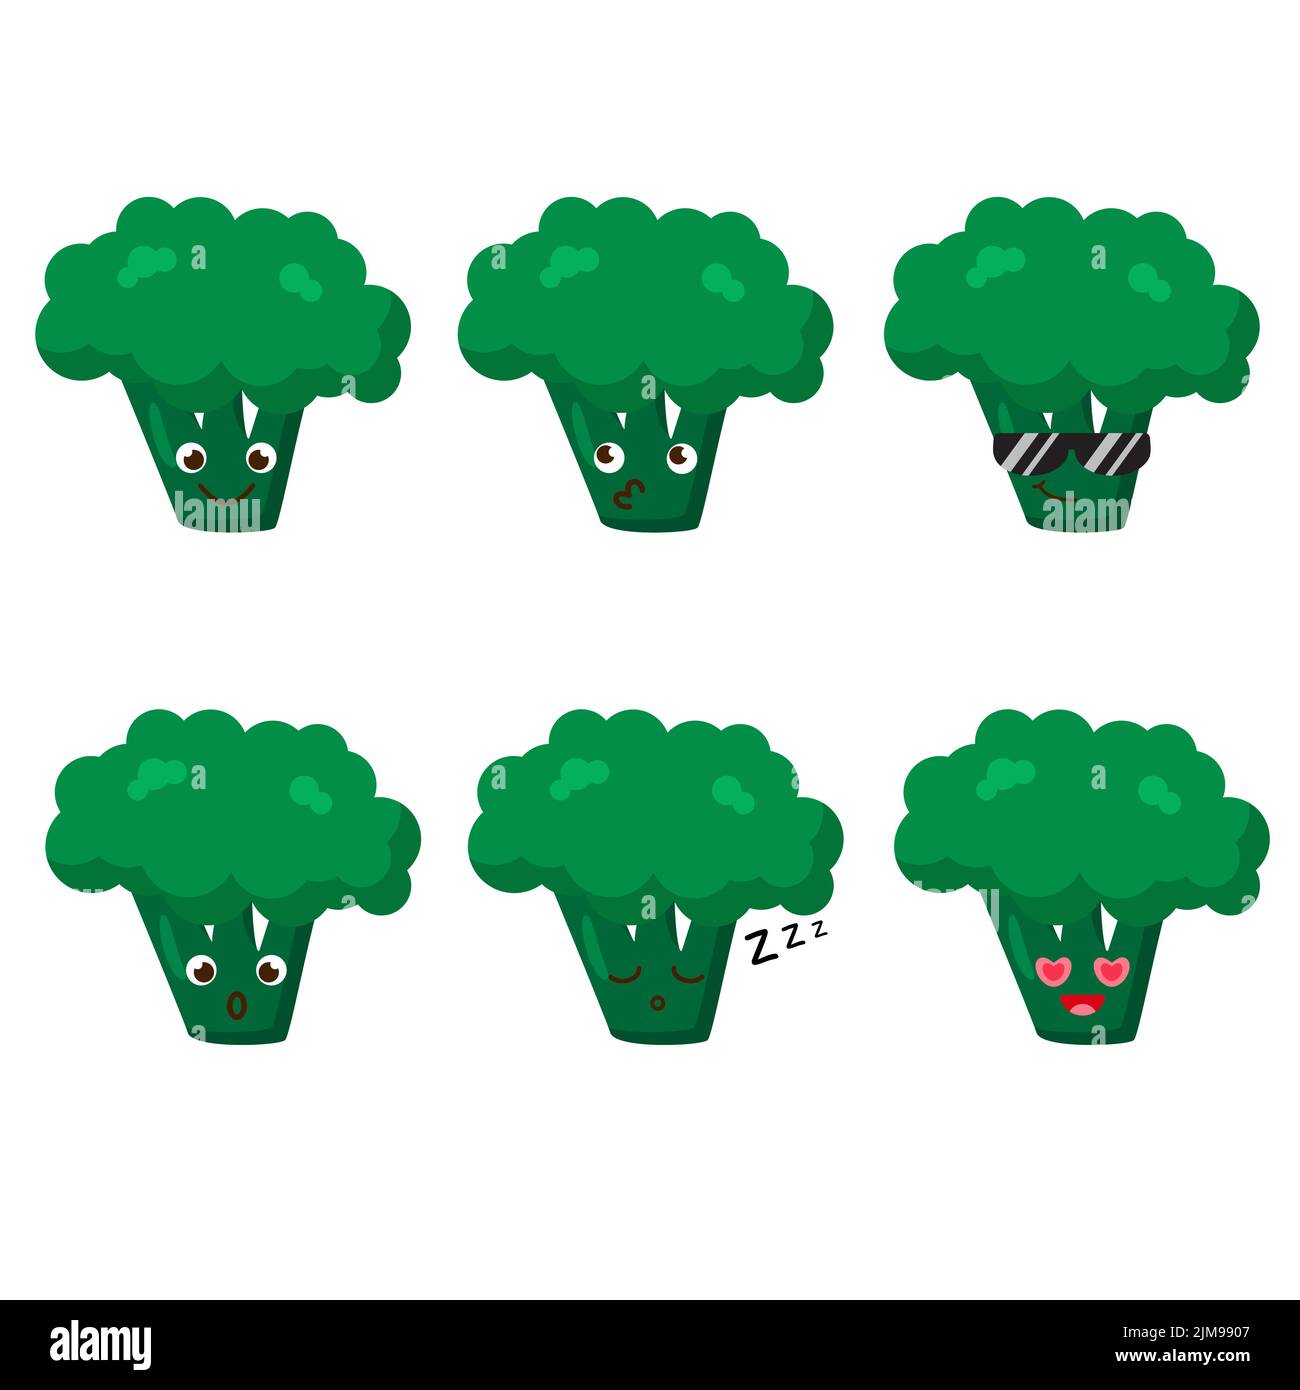 Set of broccoli emojis. Kawaii style icons, vegetable characters. Vector illustration in cartoon flat style. Set of funny smiles or emoticons. Good Stock Vector